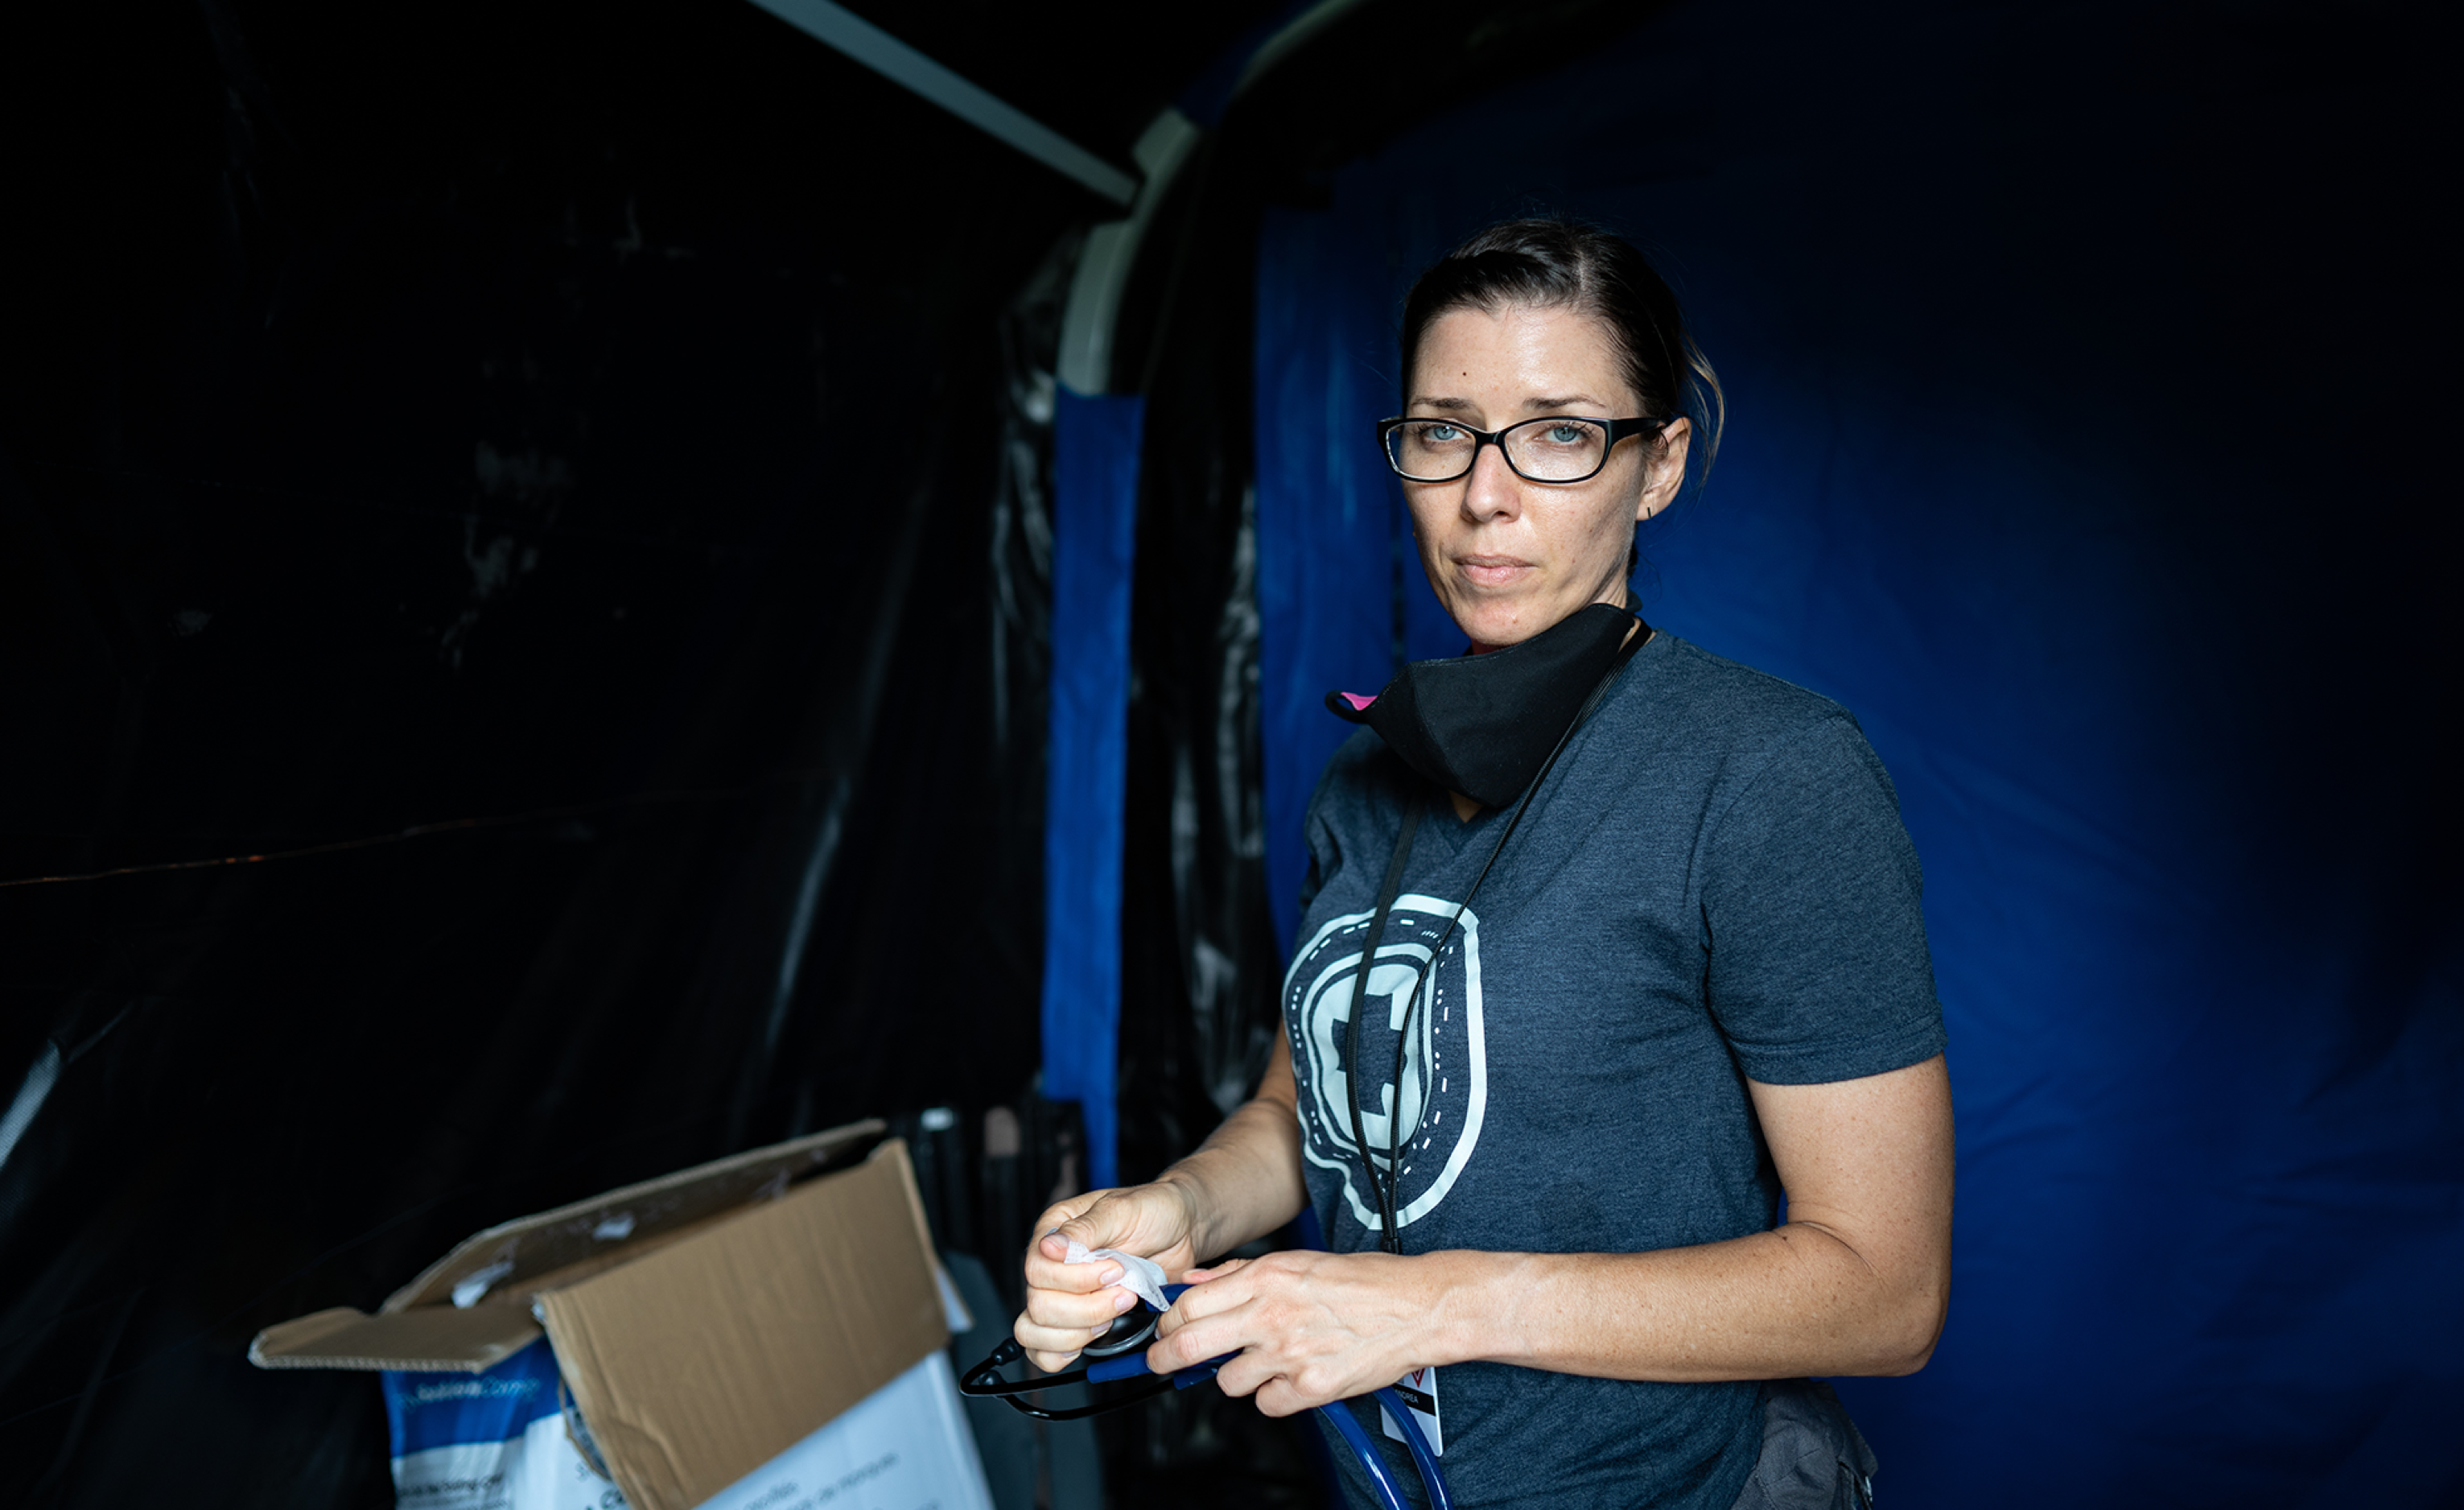 Andrea Leiner at the Matamoros tent camp. Image by Lexie Harrison-Cripps. Mexico, 2020.